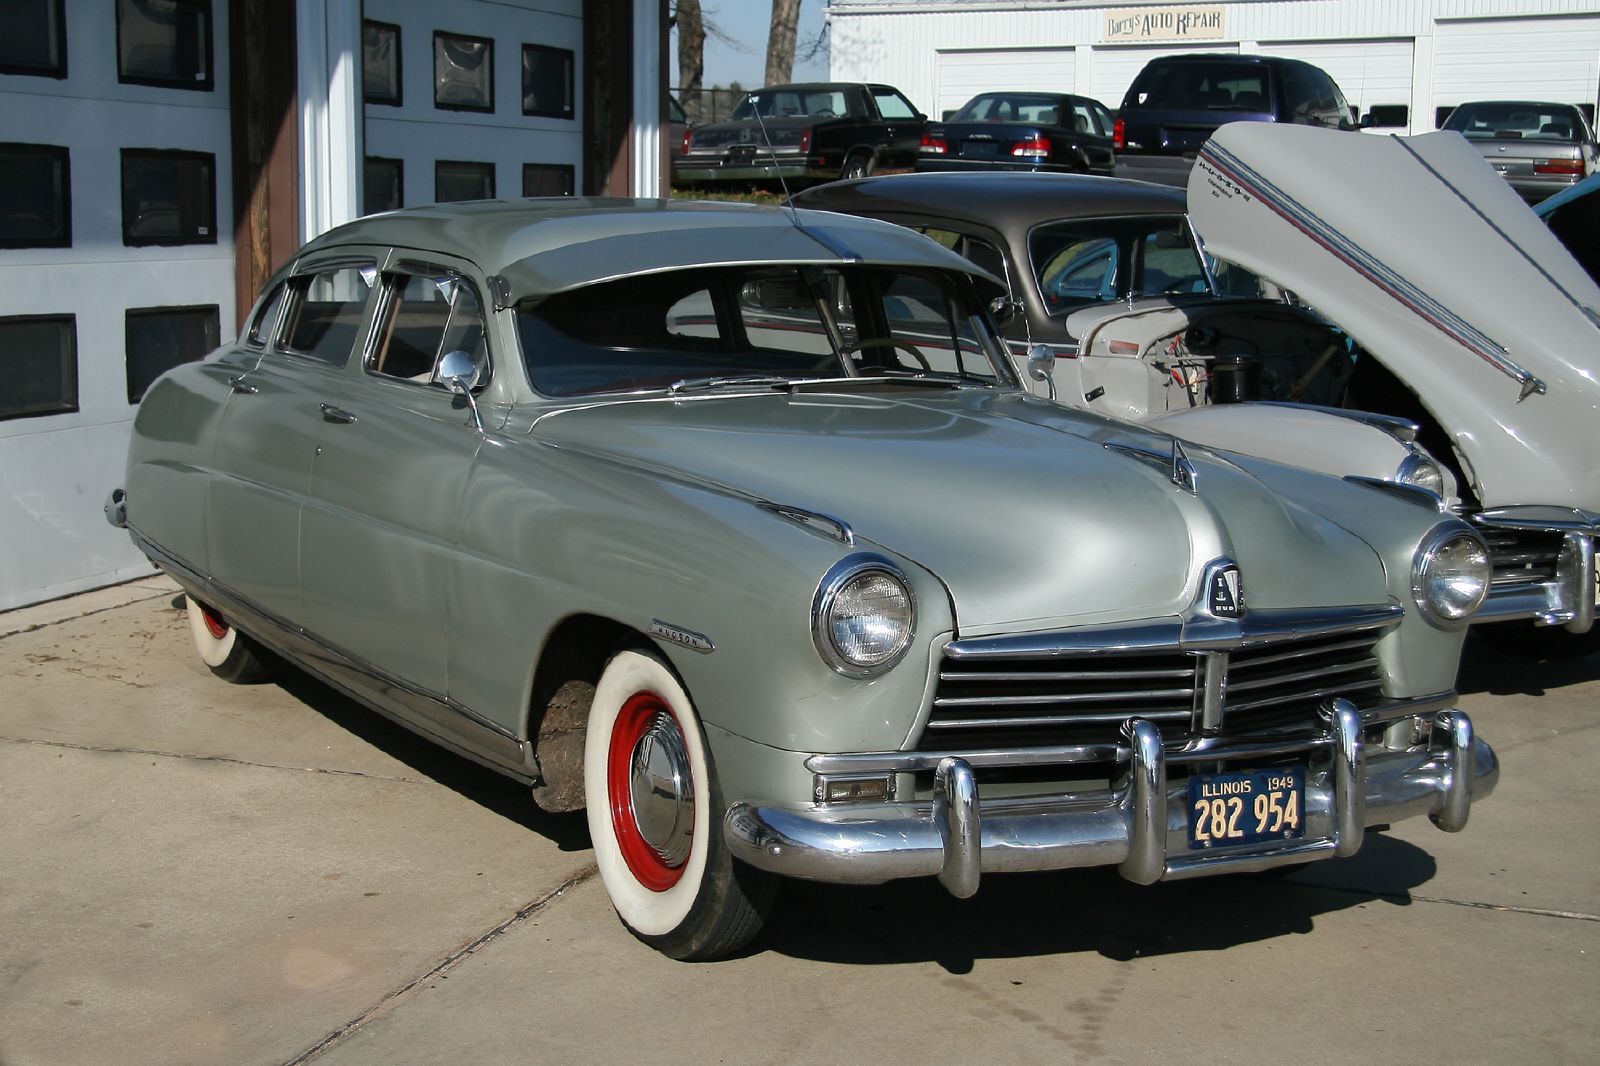 1949 Hudson Pacemaker | Flickr - Photo Sharing!